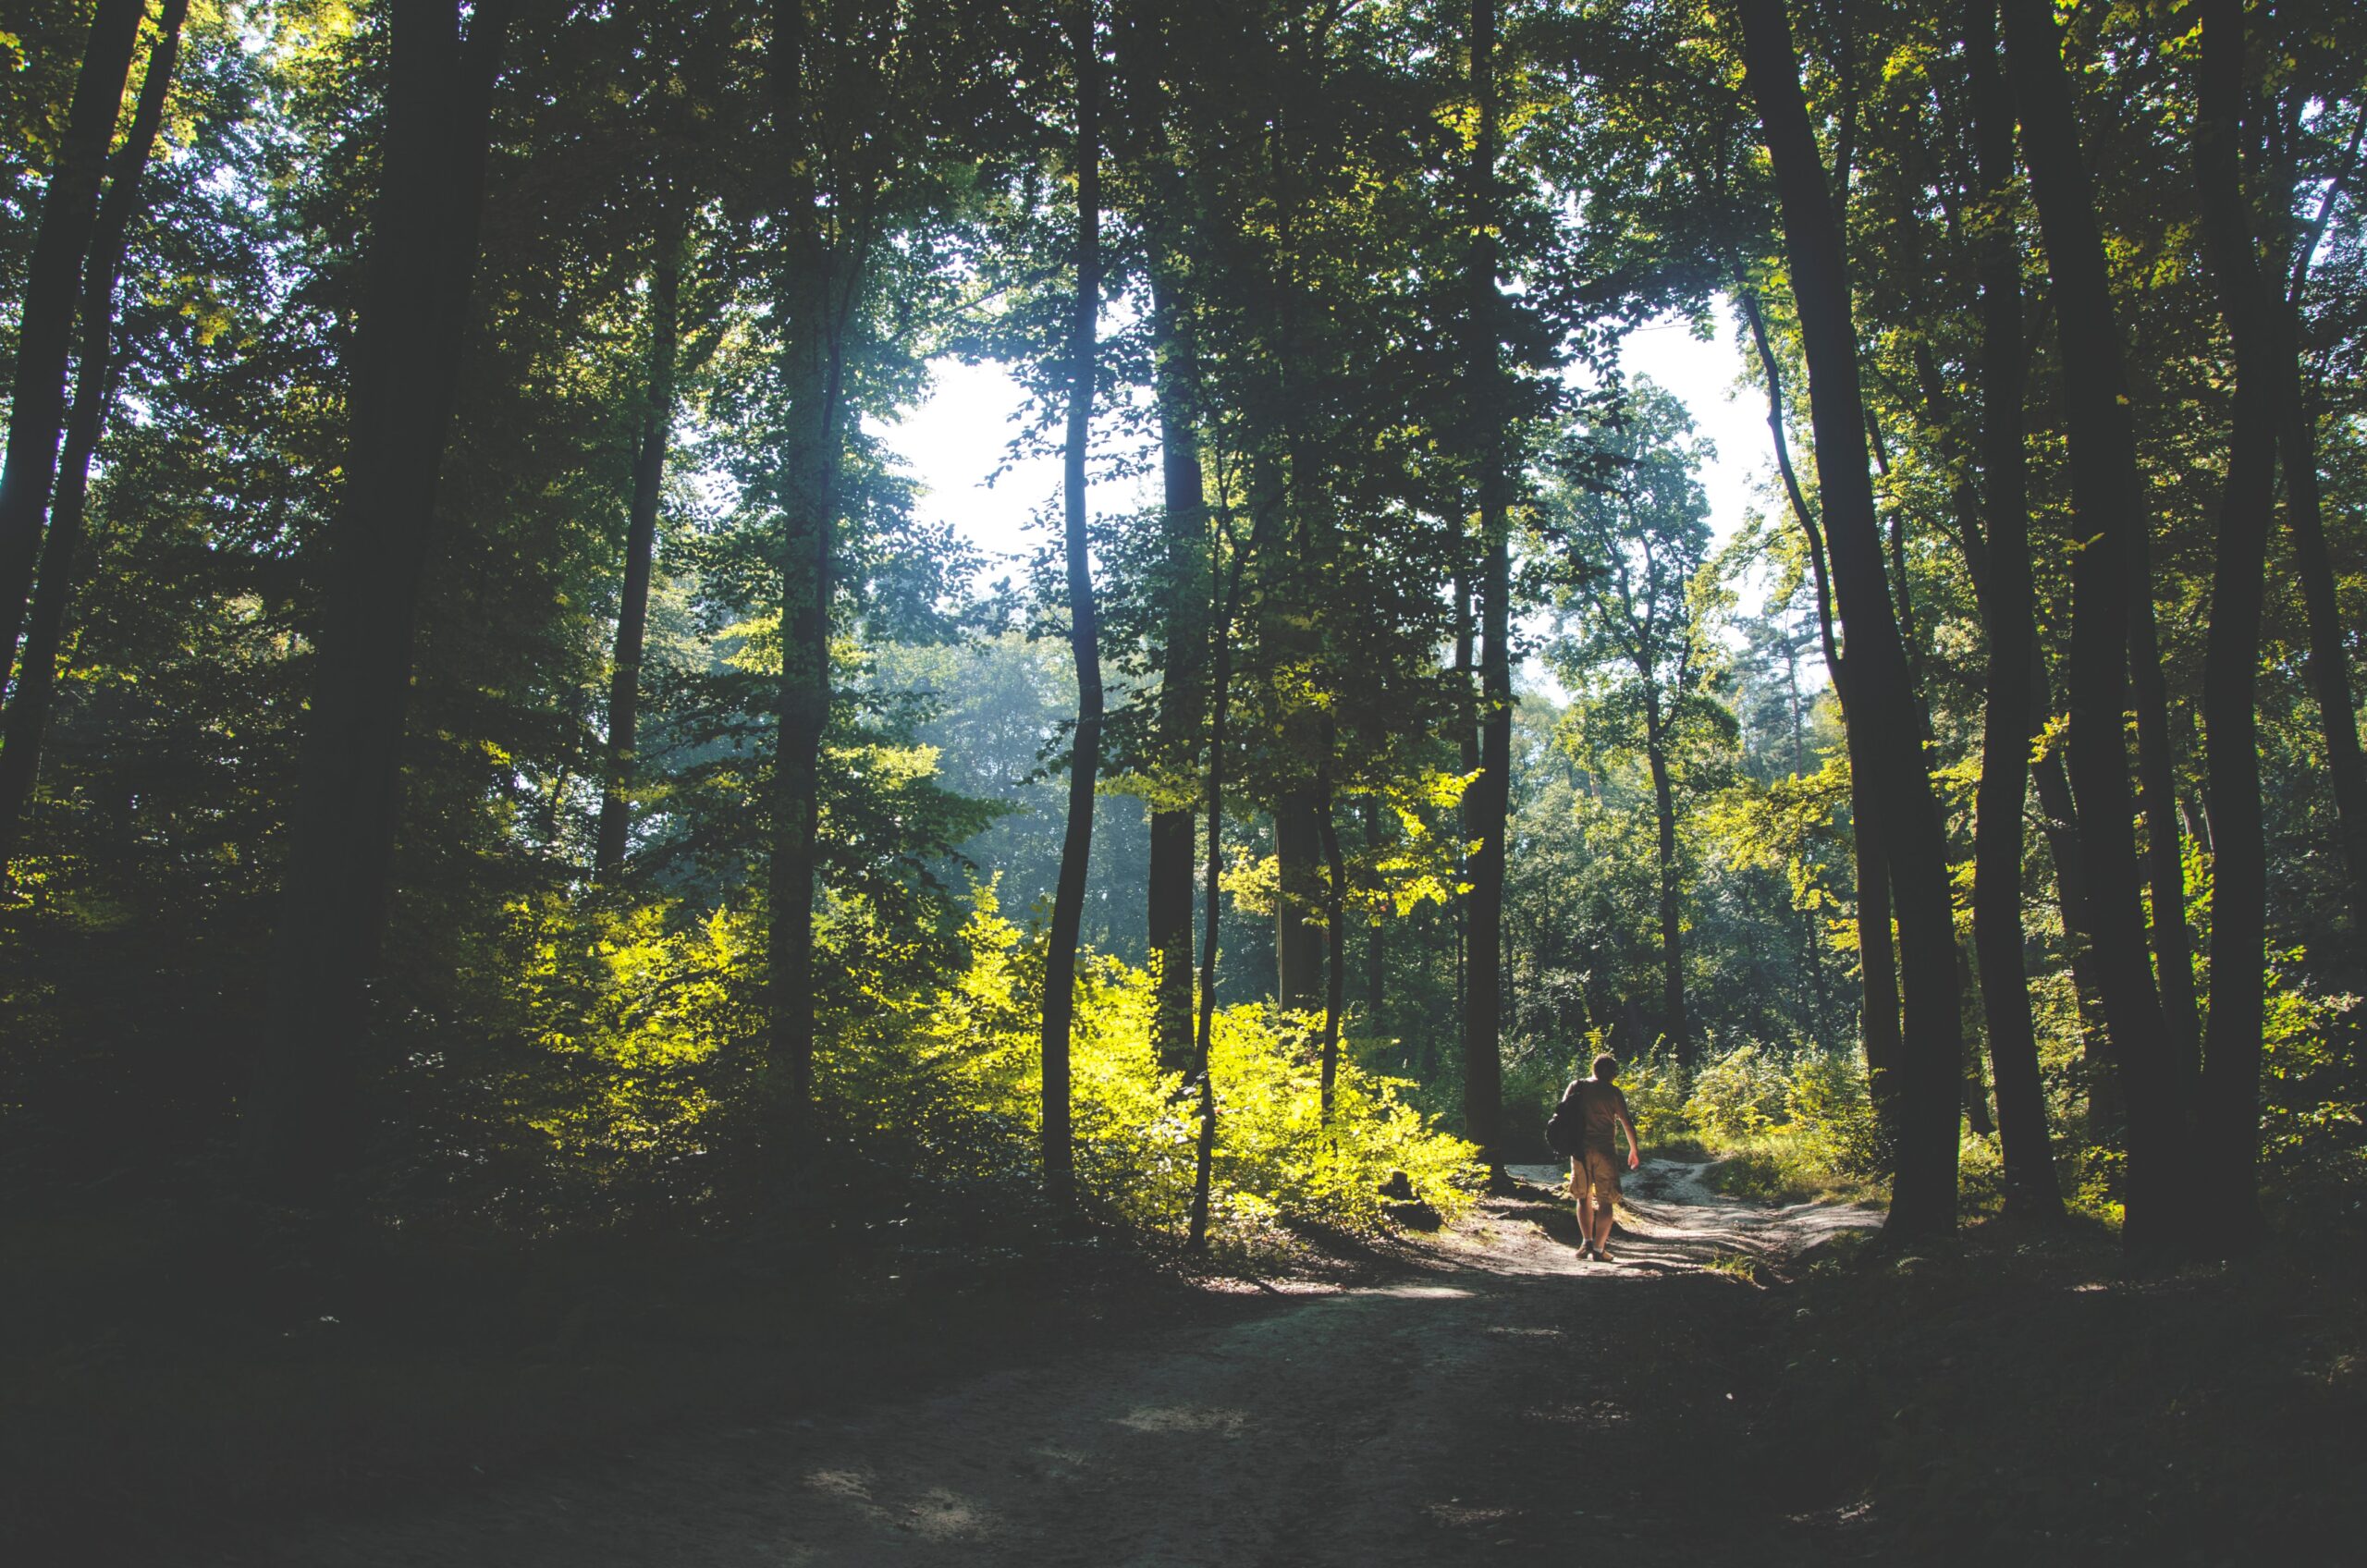 A person walking in a forest